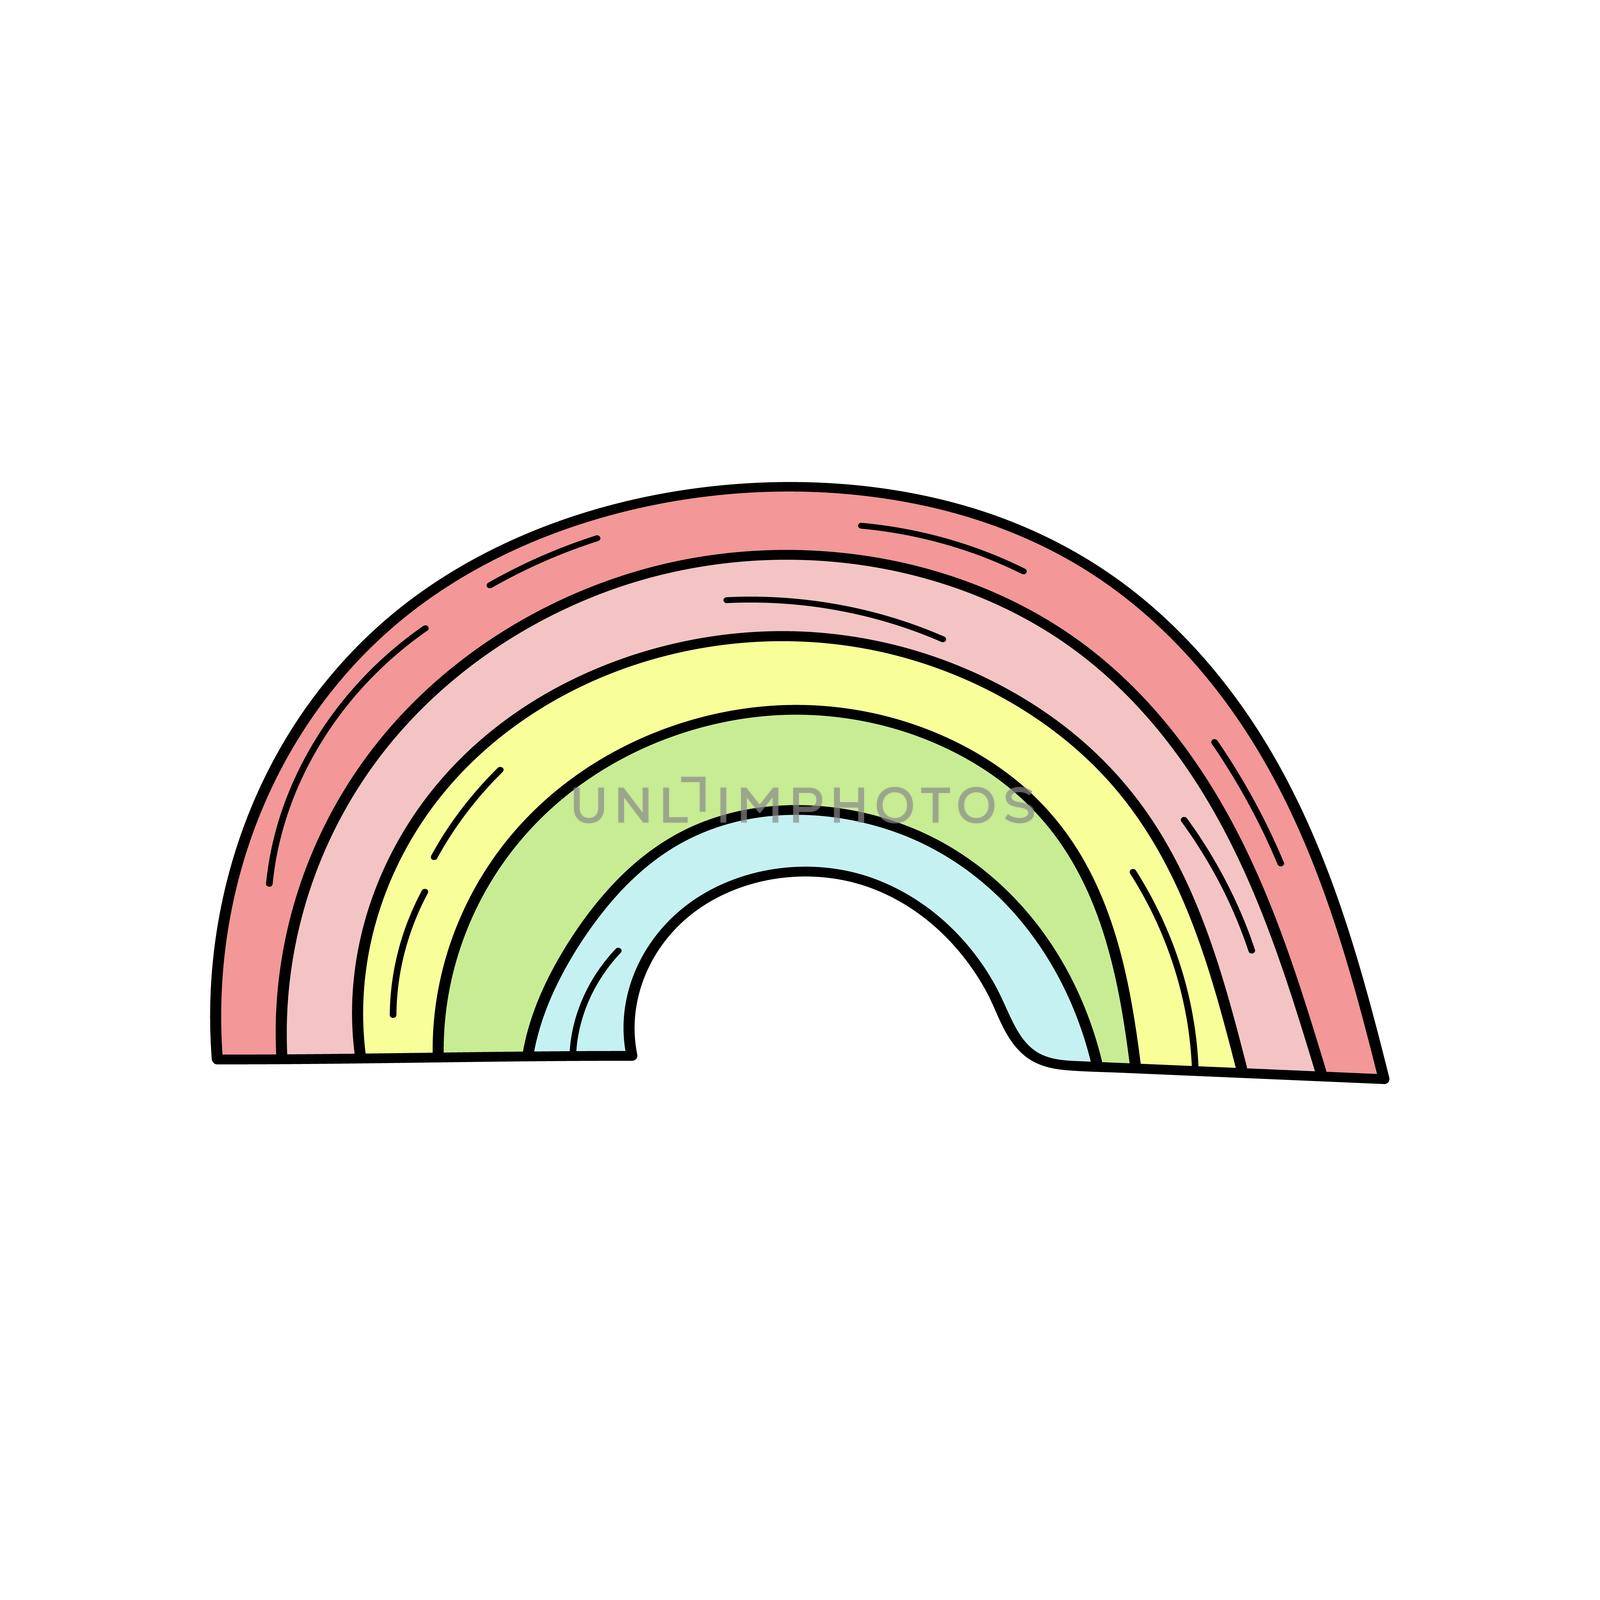 Rainbow Doodle icon. Simple hand drawn rainbow icon on white by natali_brill